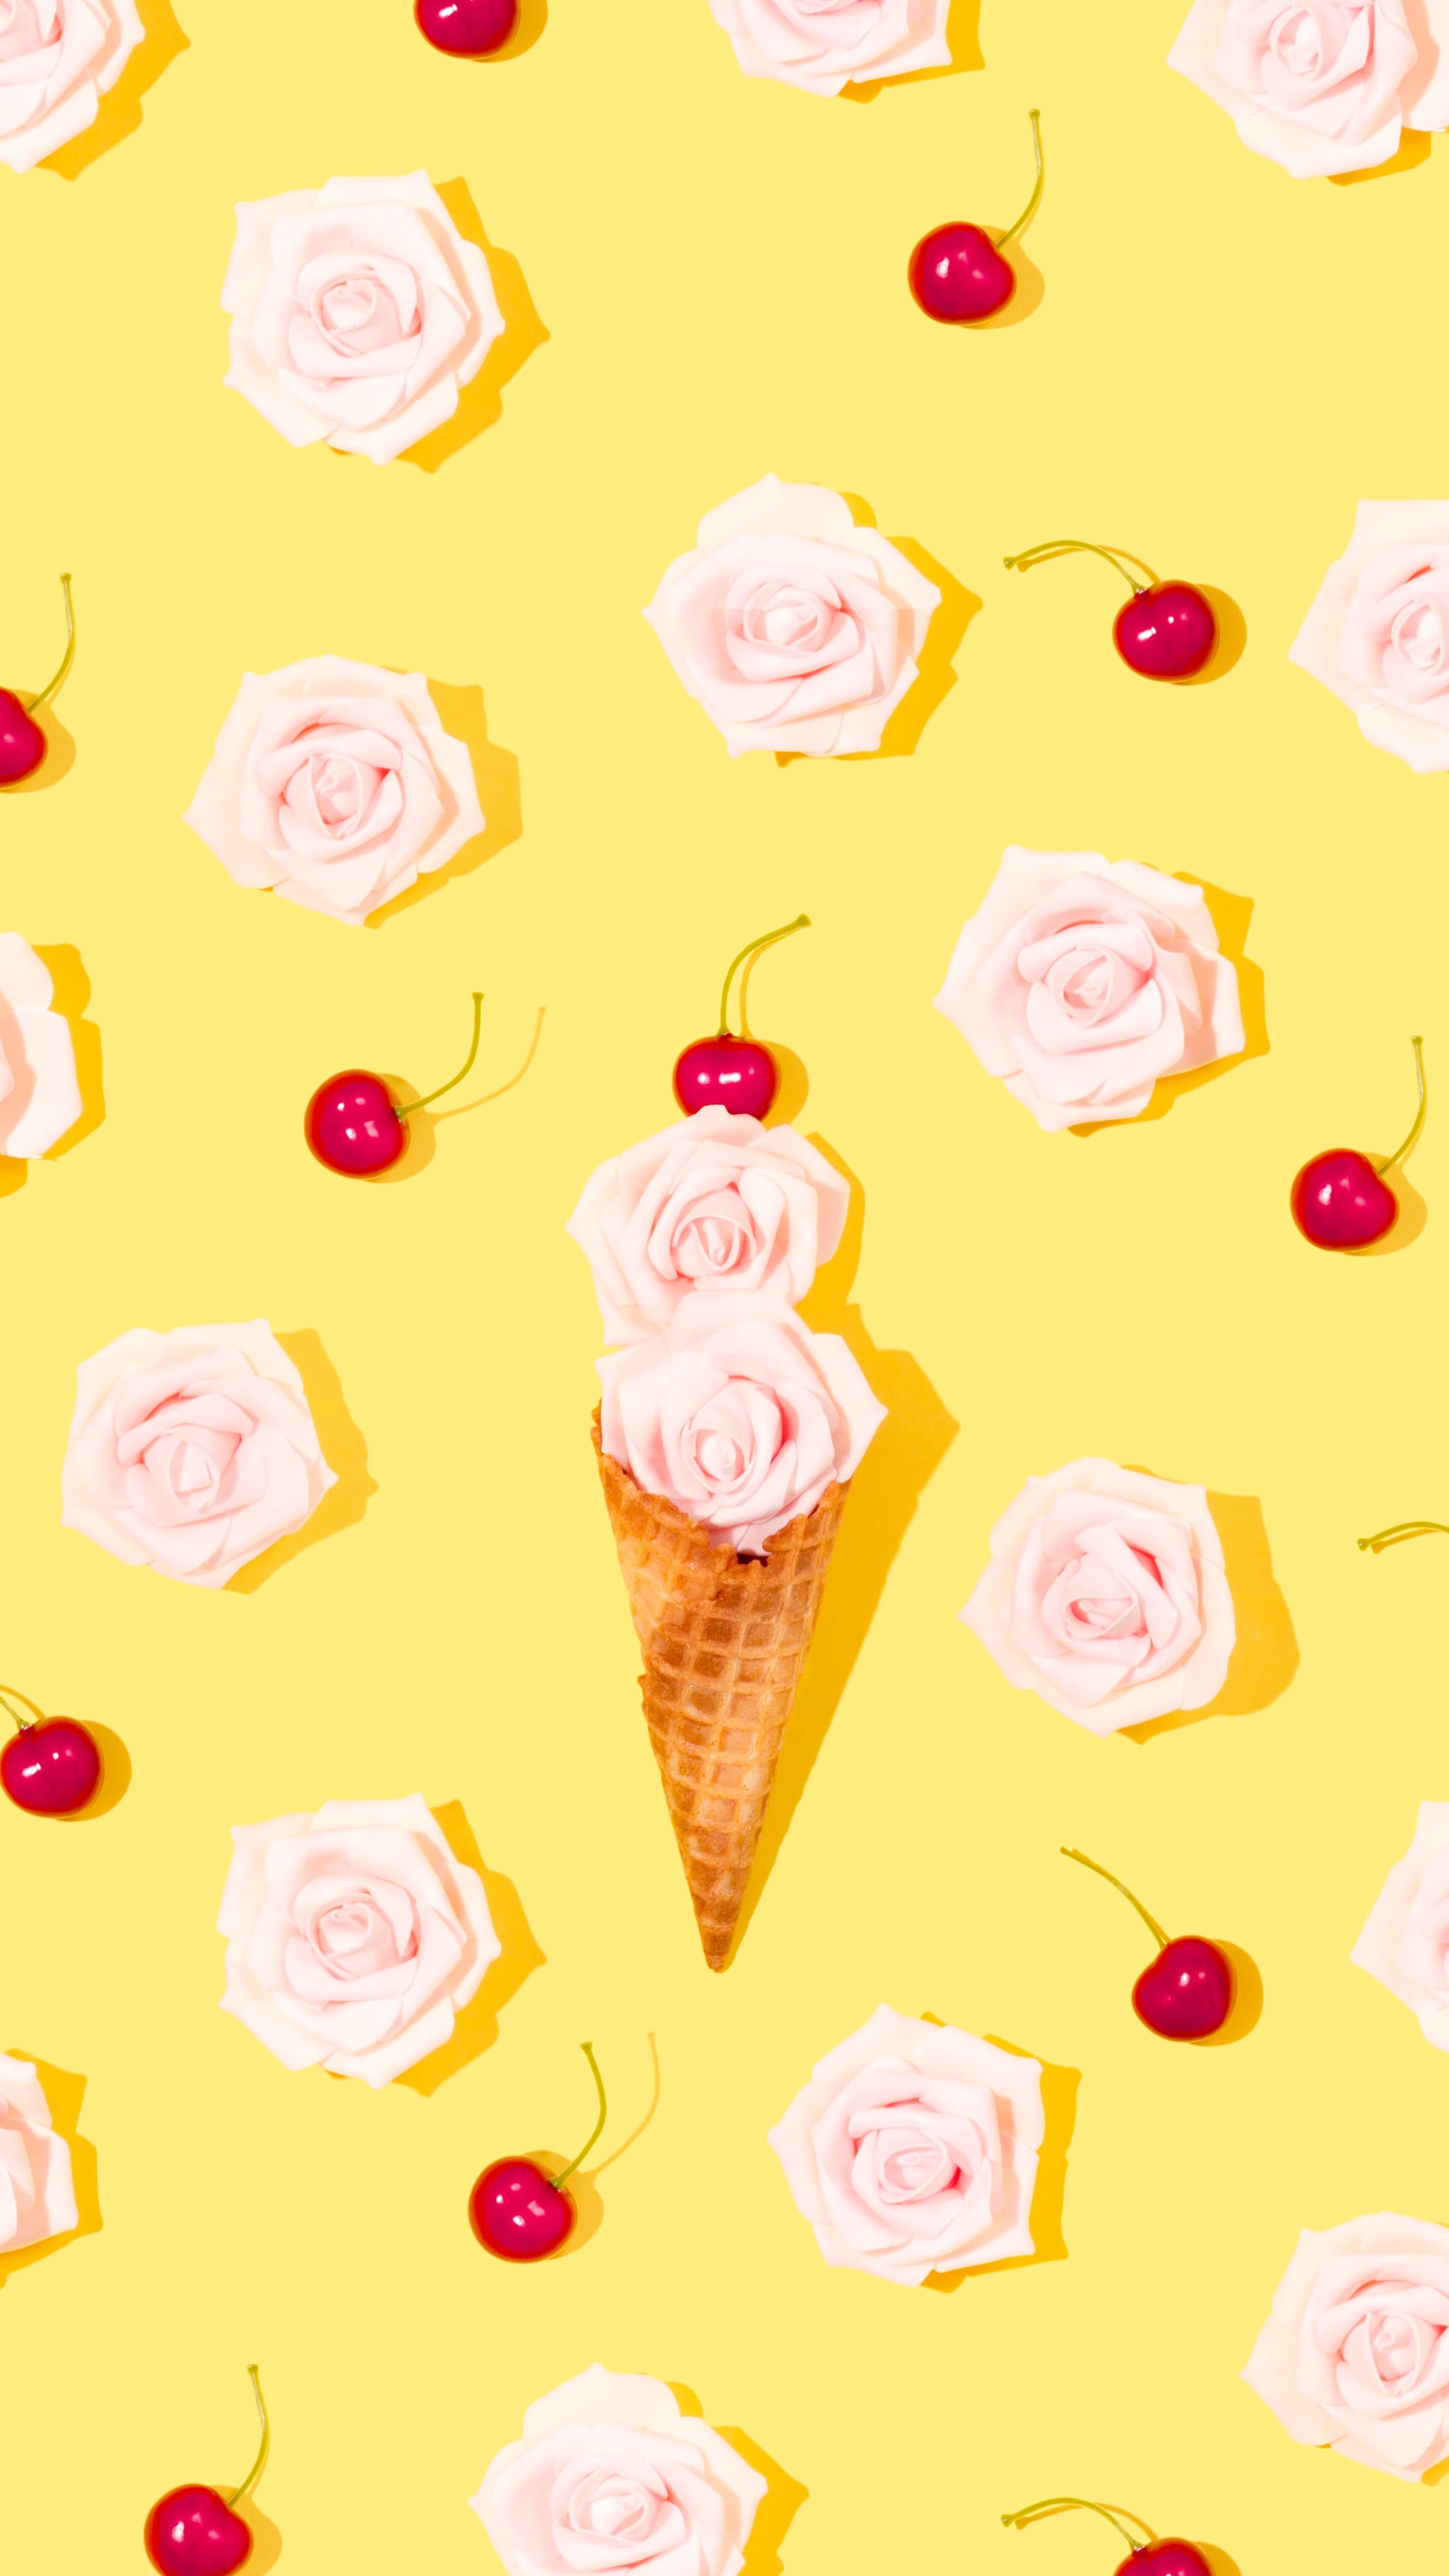 Valentine's Day Wallpaper: Cherry on Top. The Dreamiest iPhone Wallpaper For Valentine's Day That Fit Any Aesthetic